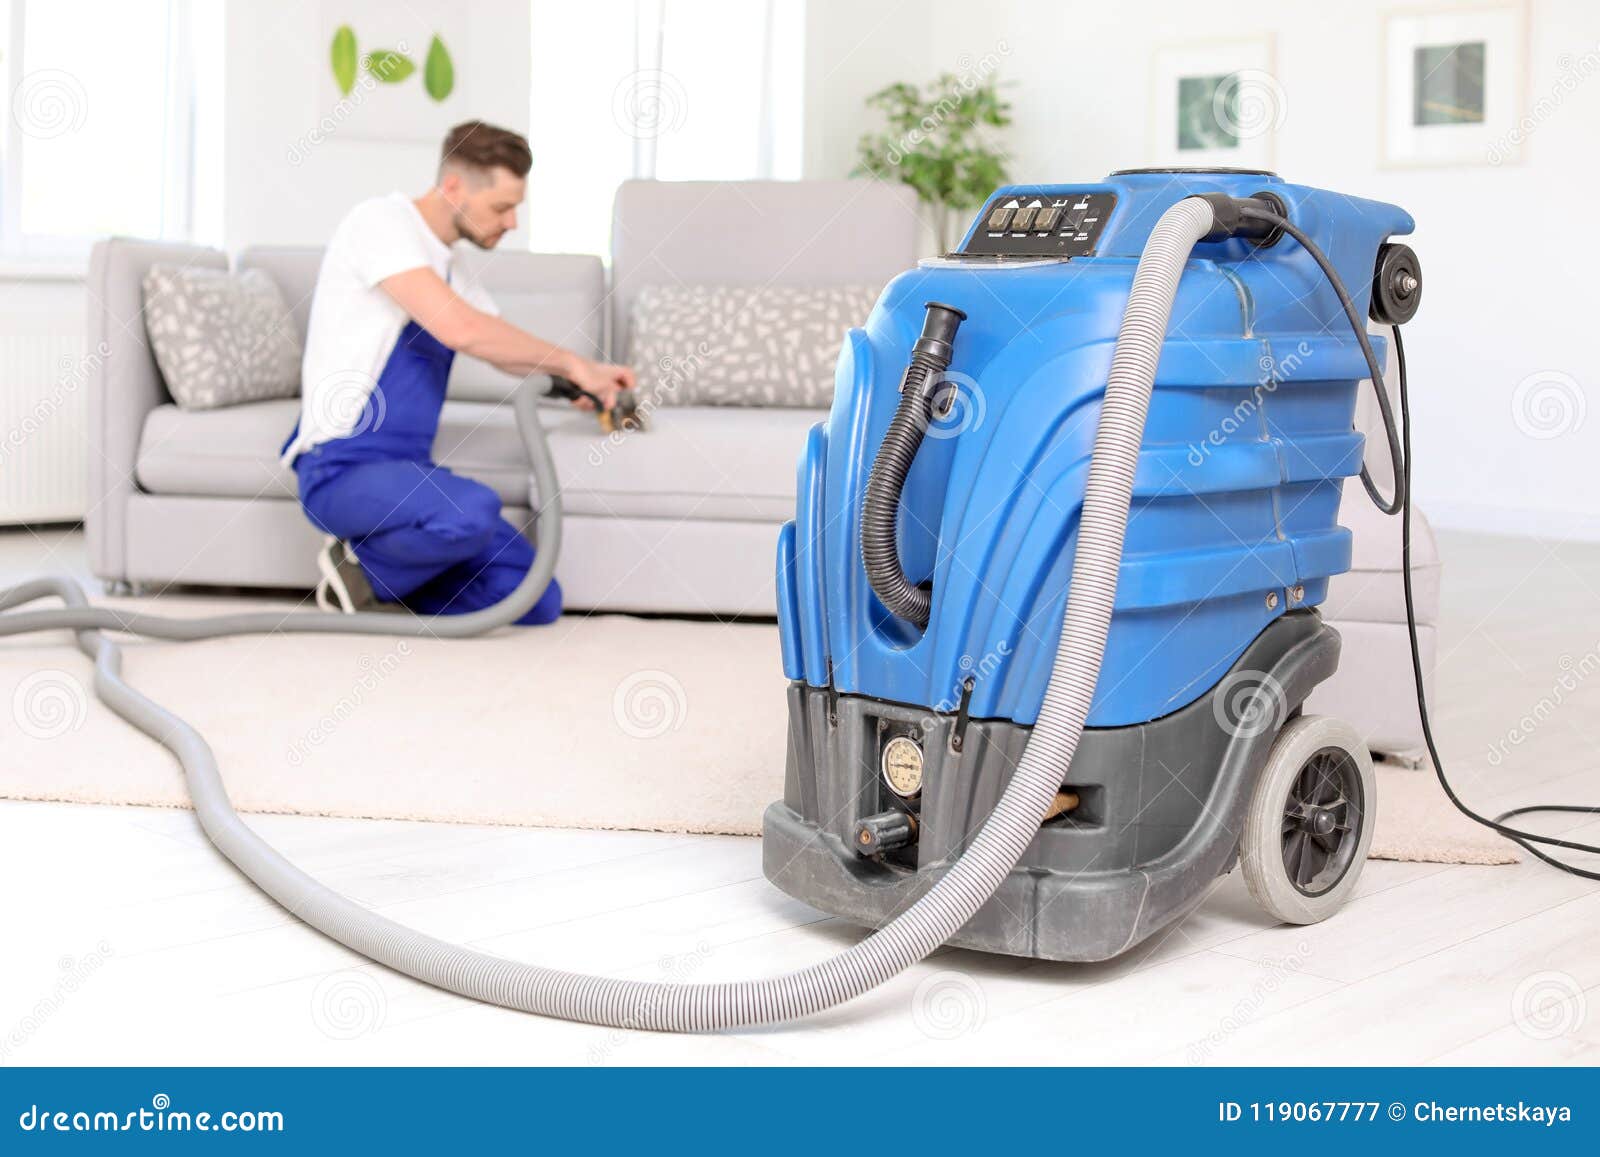 Dry Cleaning Machine And Male Worker Stock Image Image Of